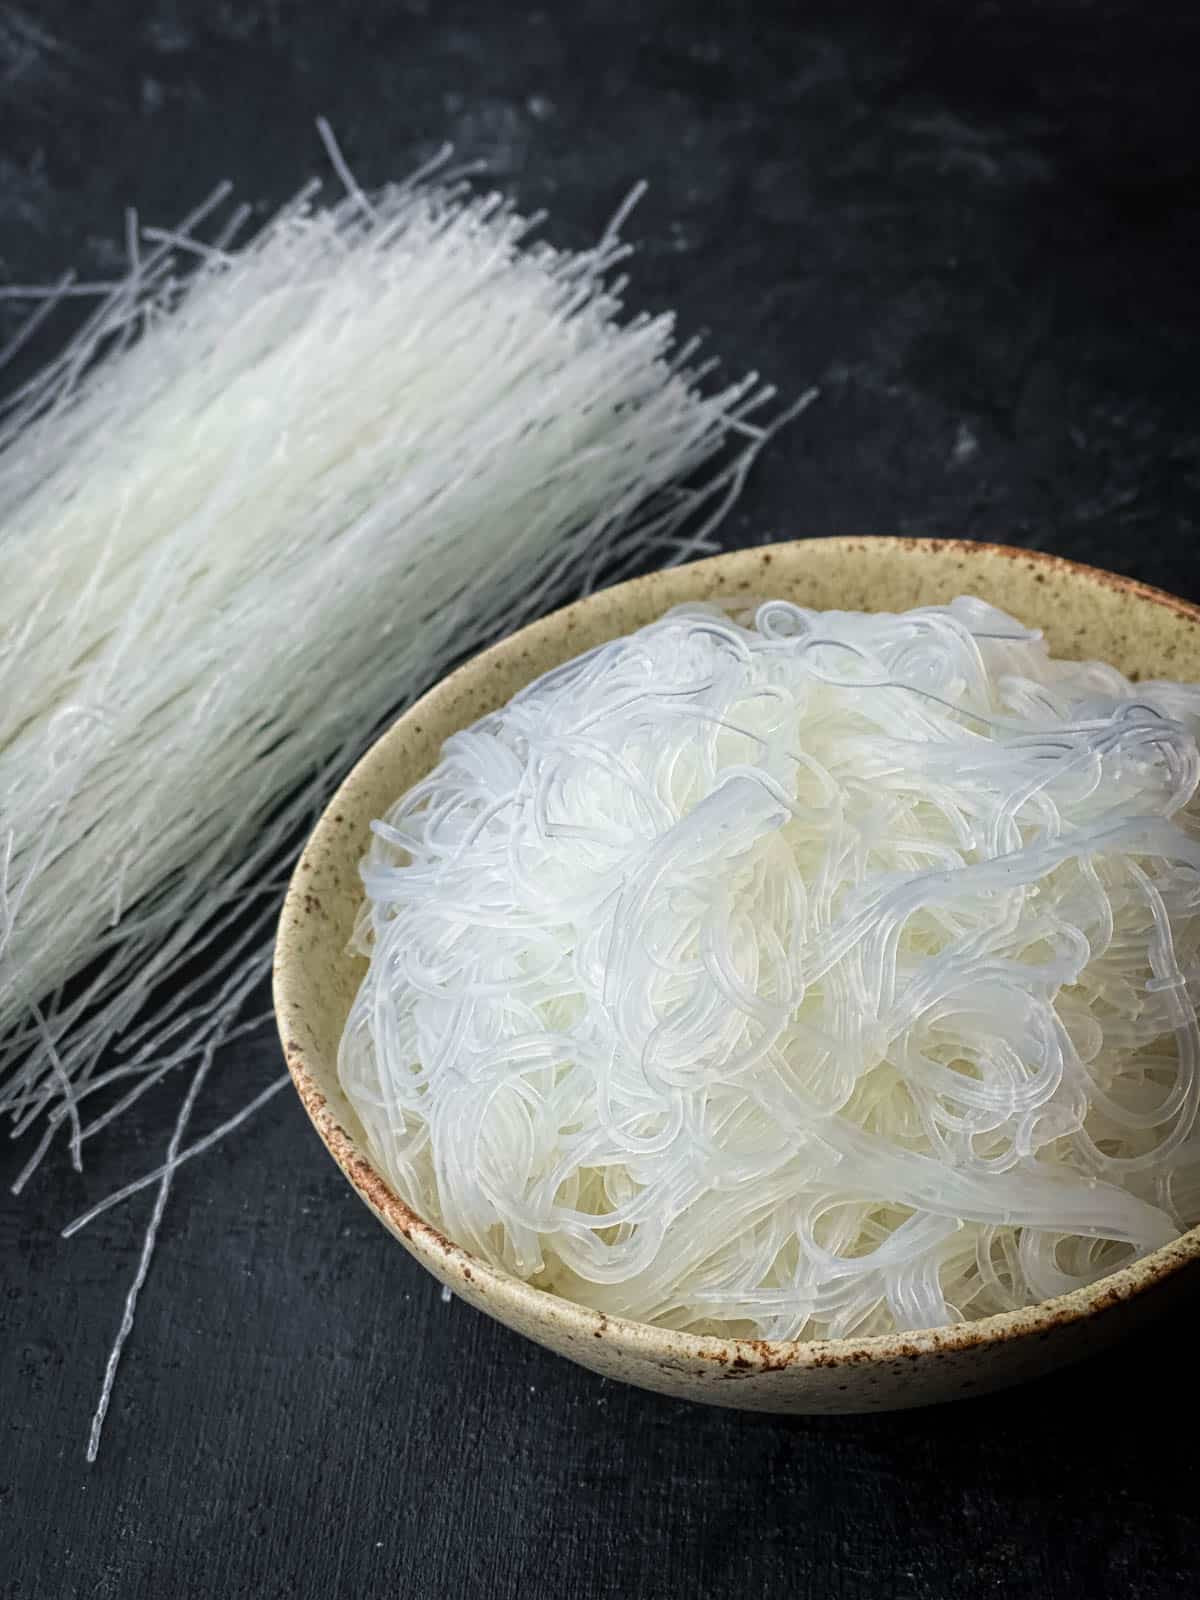 Dry glass noodles and softened glass noodles in a bowl